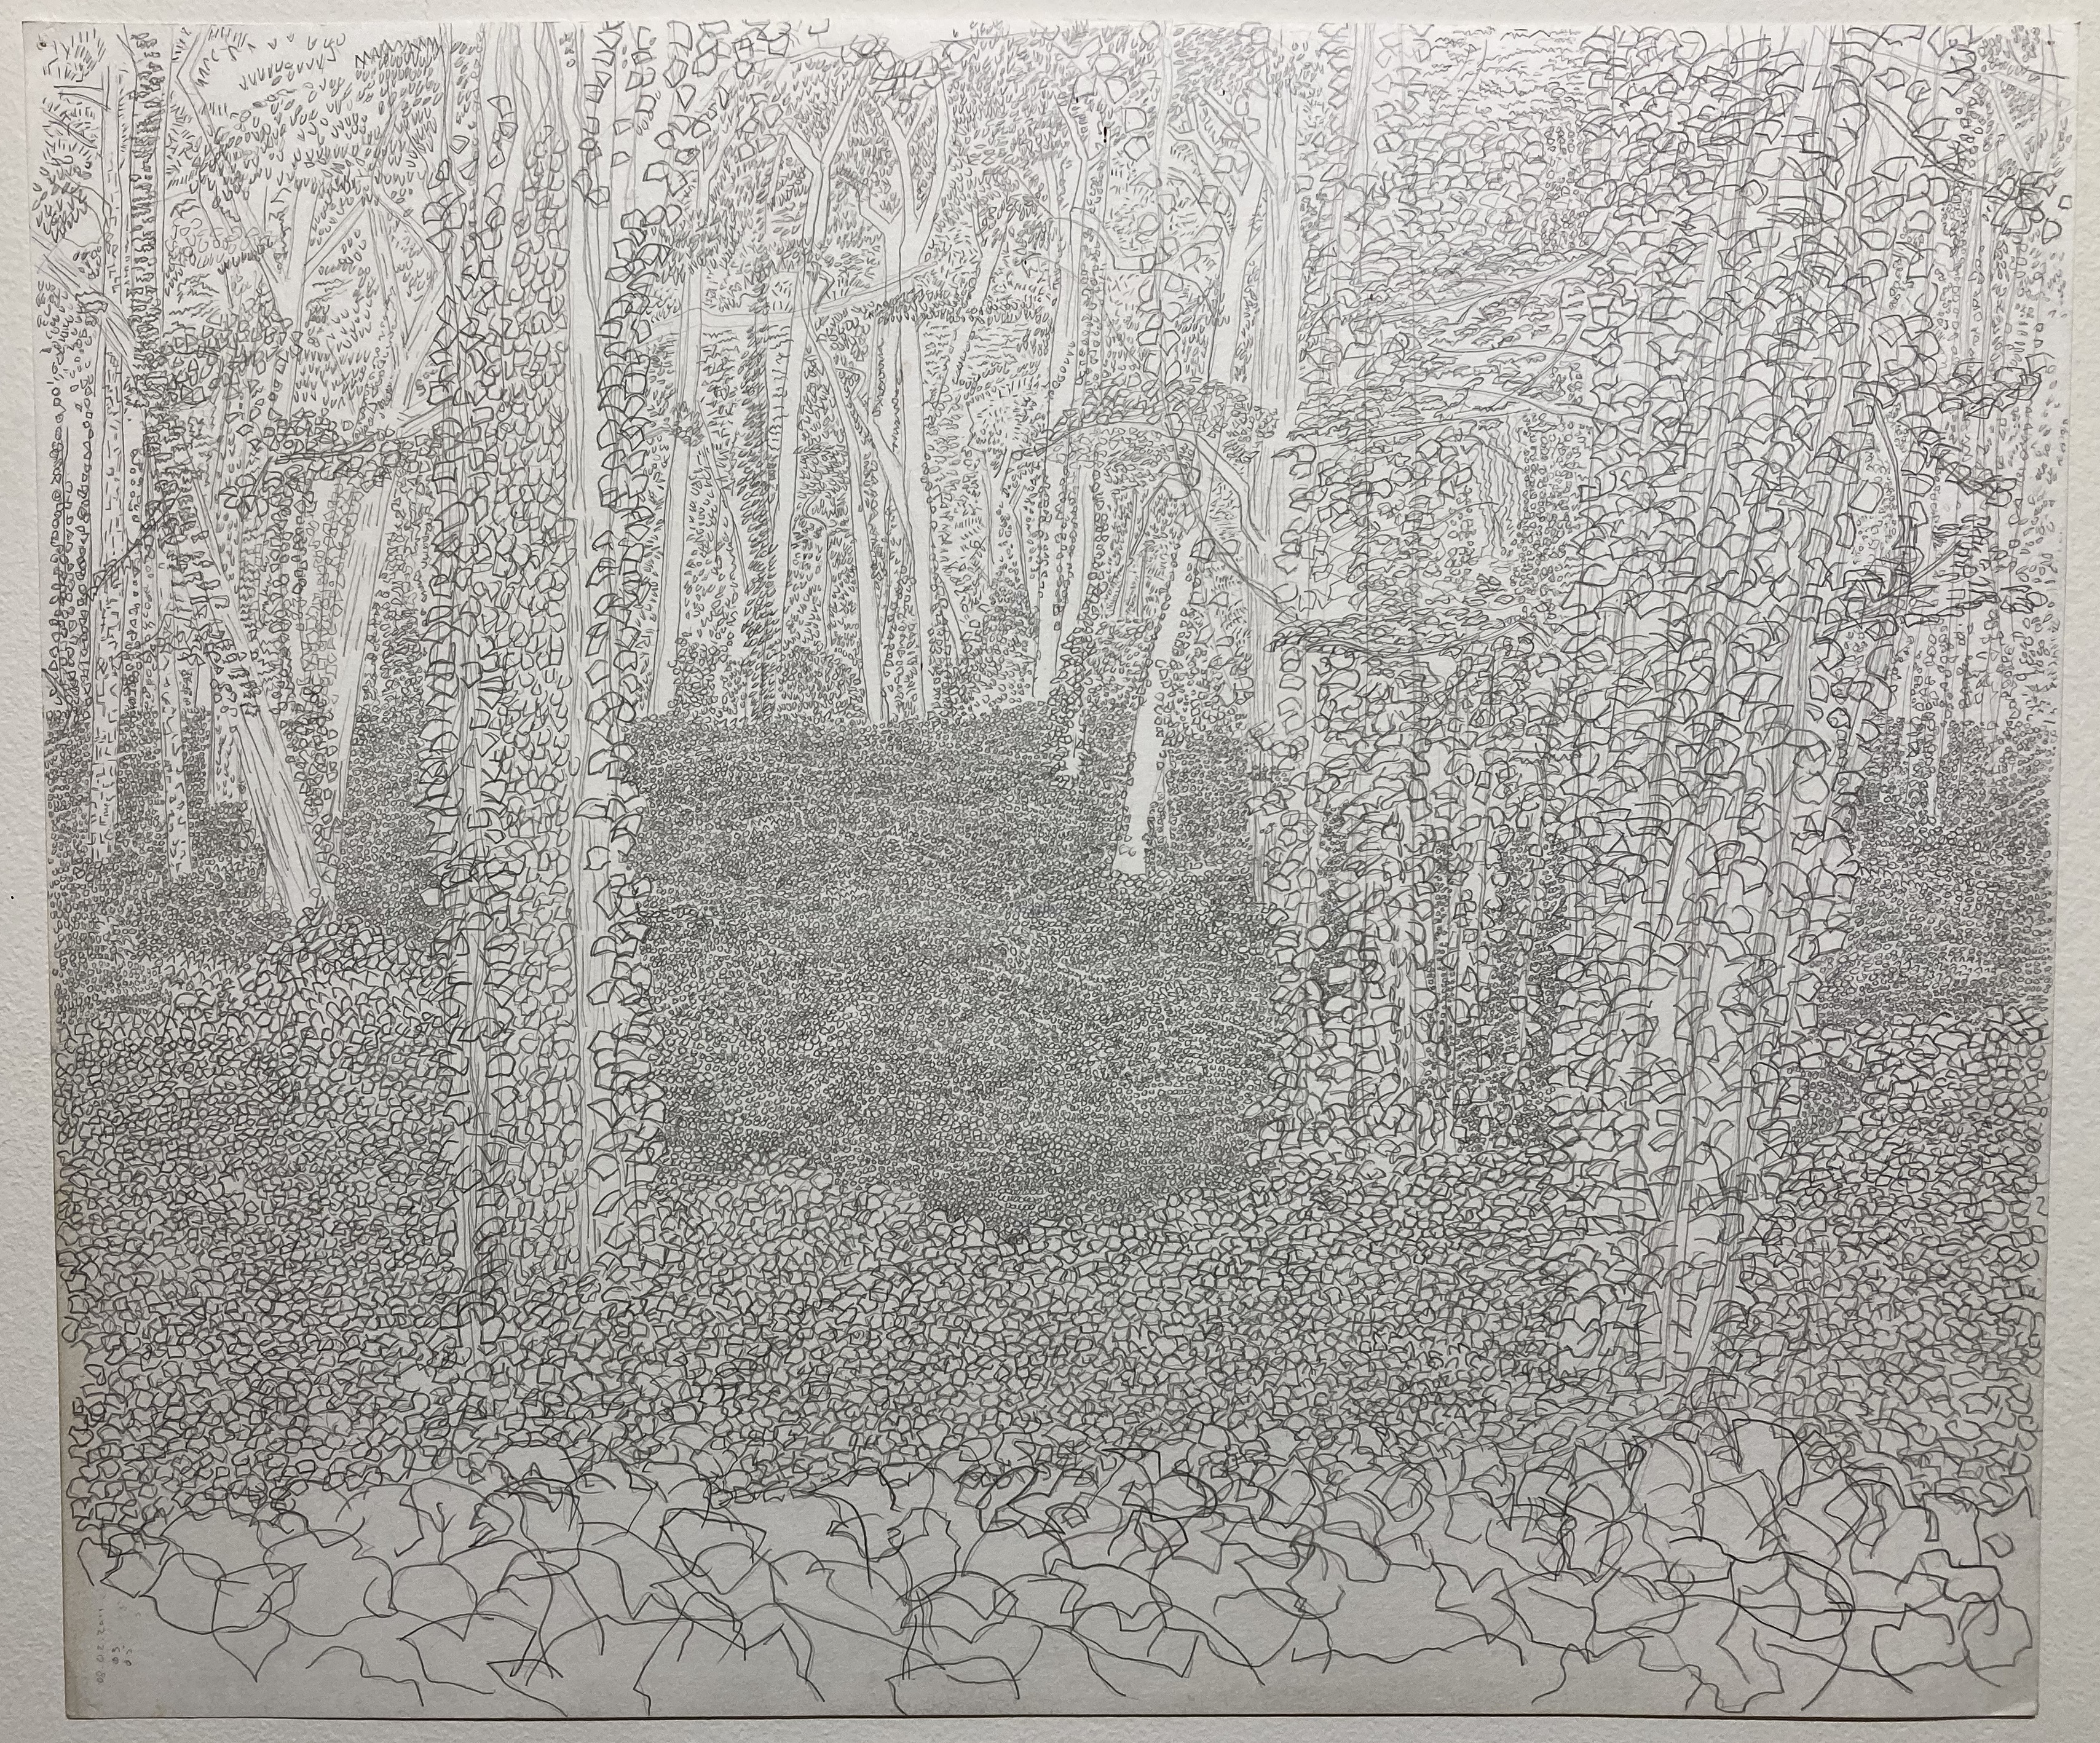 Jeffrey Morton, Kudzu drawing 031, 07:46:00 (source for Misted Green), 2016, graphite on Holbein paper, 16.5" x 21"